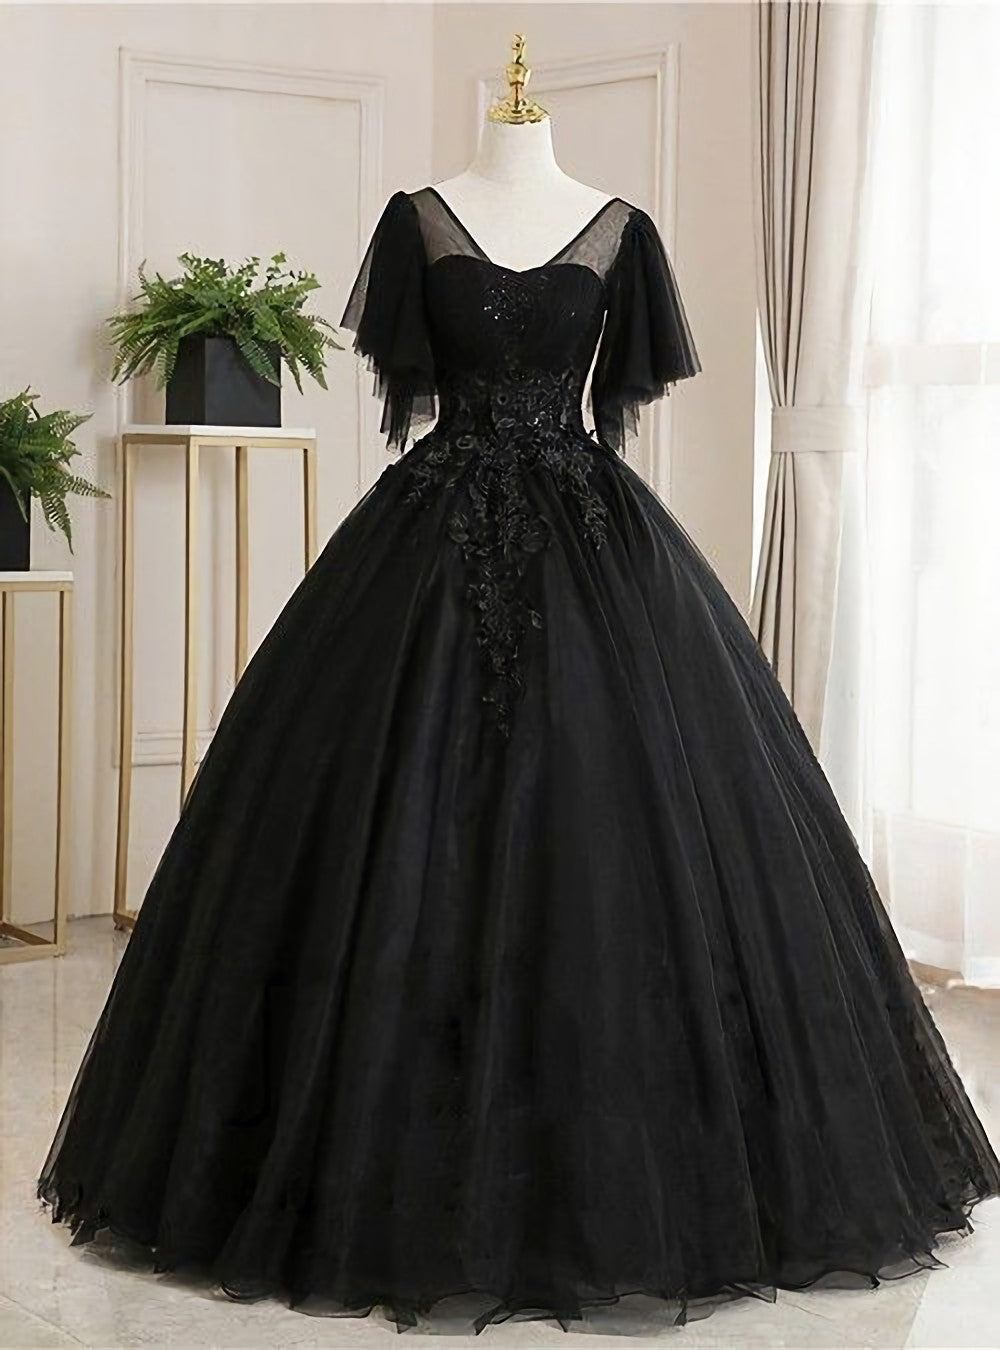 Prom Dresses A Line, Ball Gown Luxurious Floral Quinceanera Prom Dress, Scoop Neck Short Sleeve Floor Length Tulle With Pleats Embroidery